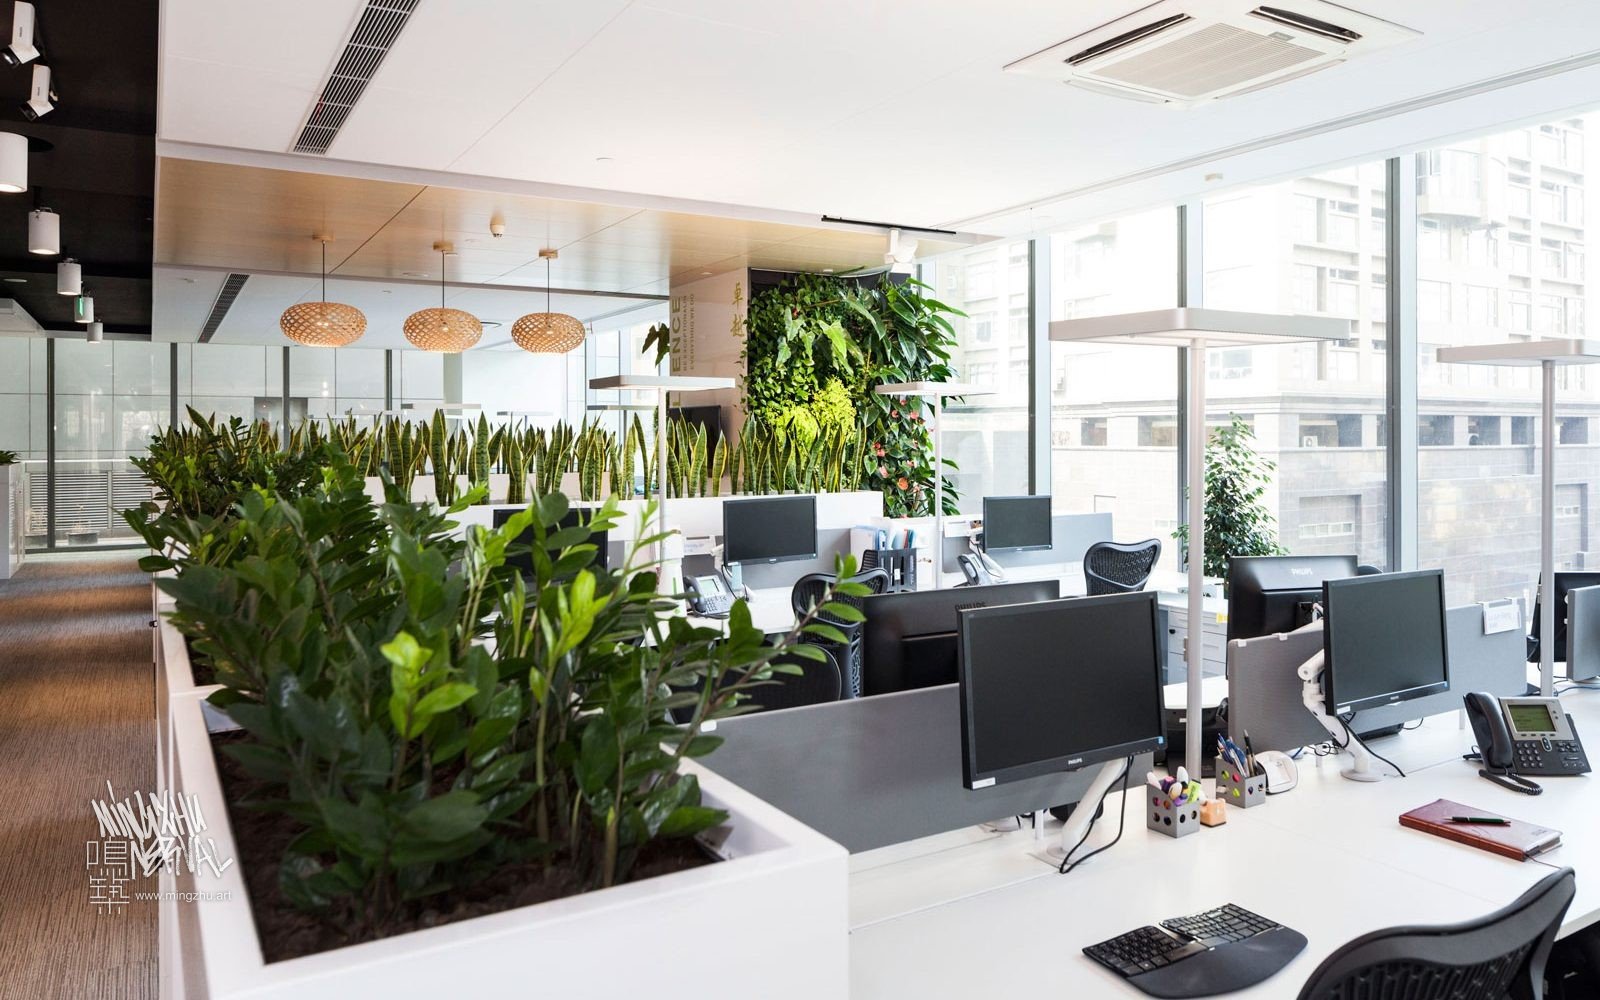 Mingzhu Nerval vertical living wall experts created a healthy nature workspace at Lendlease in Shanghai, 2014